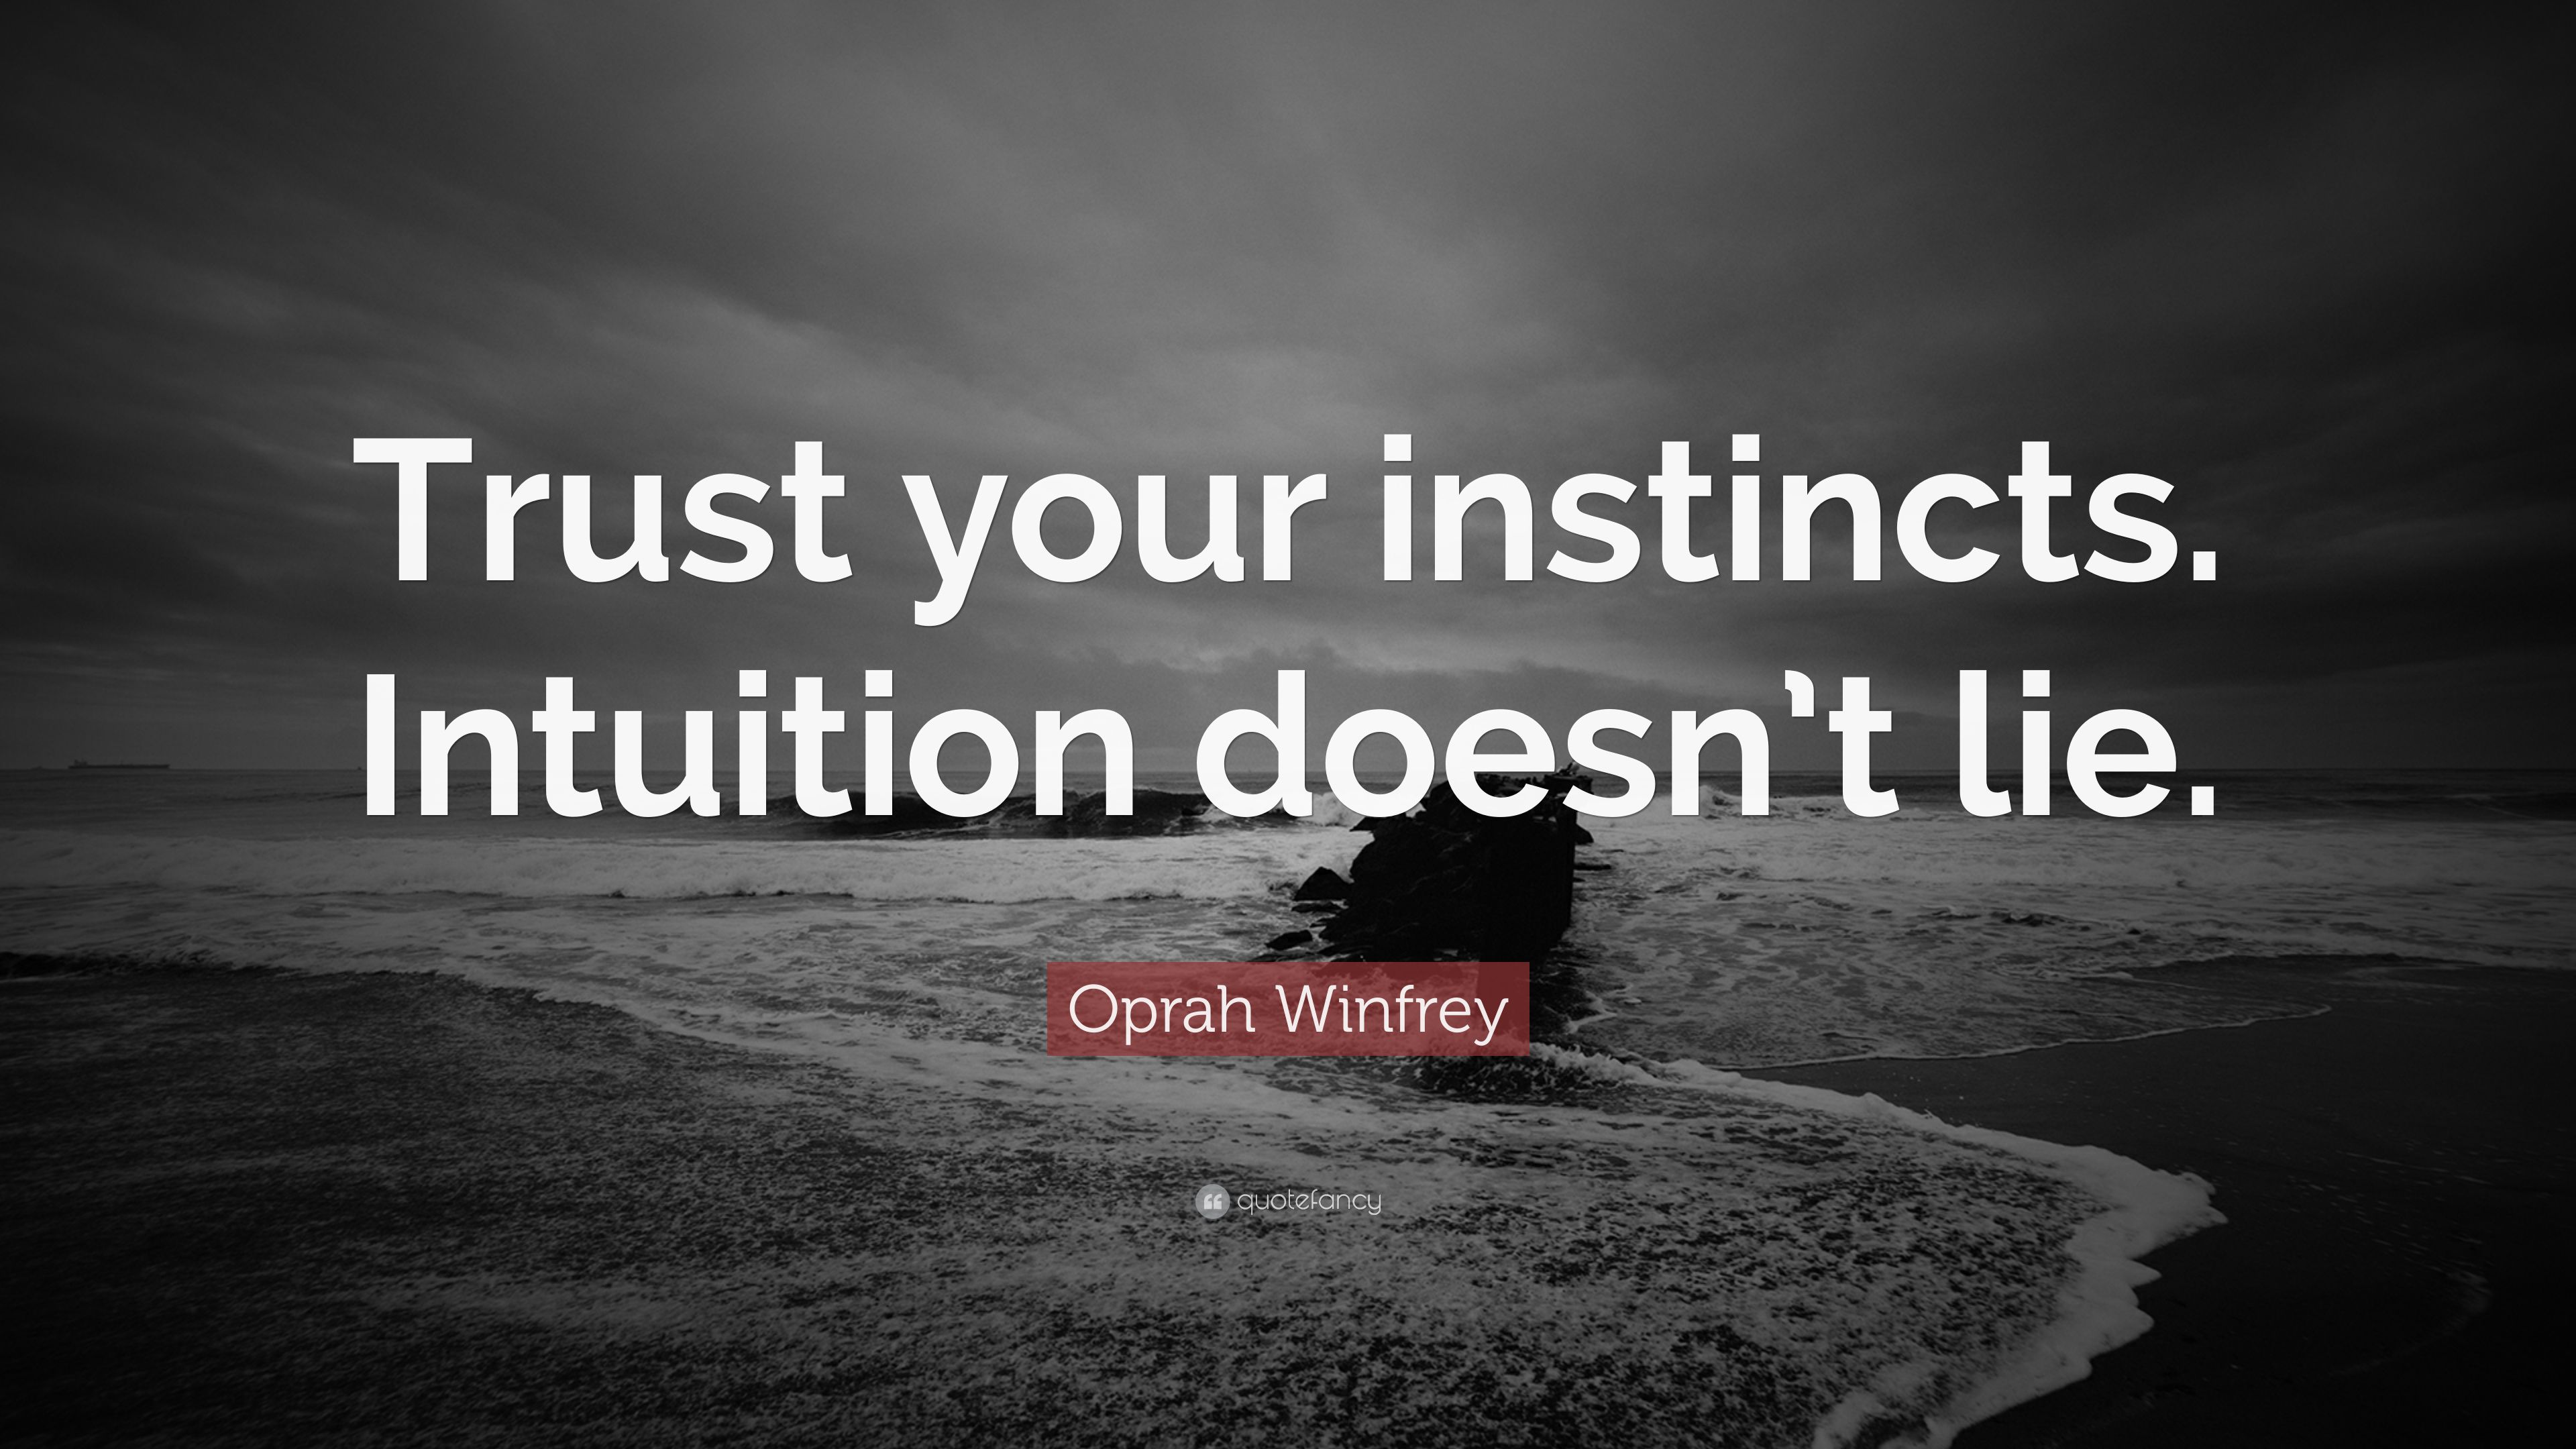 Oprah Winfrey Quote: “Trust your instincts. Intuition doesn't lie